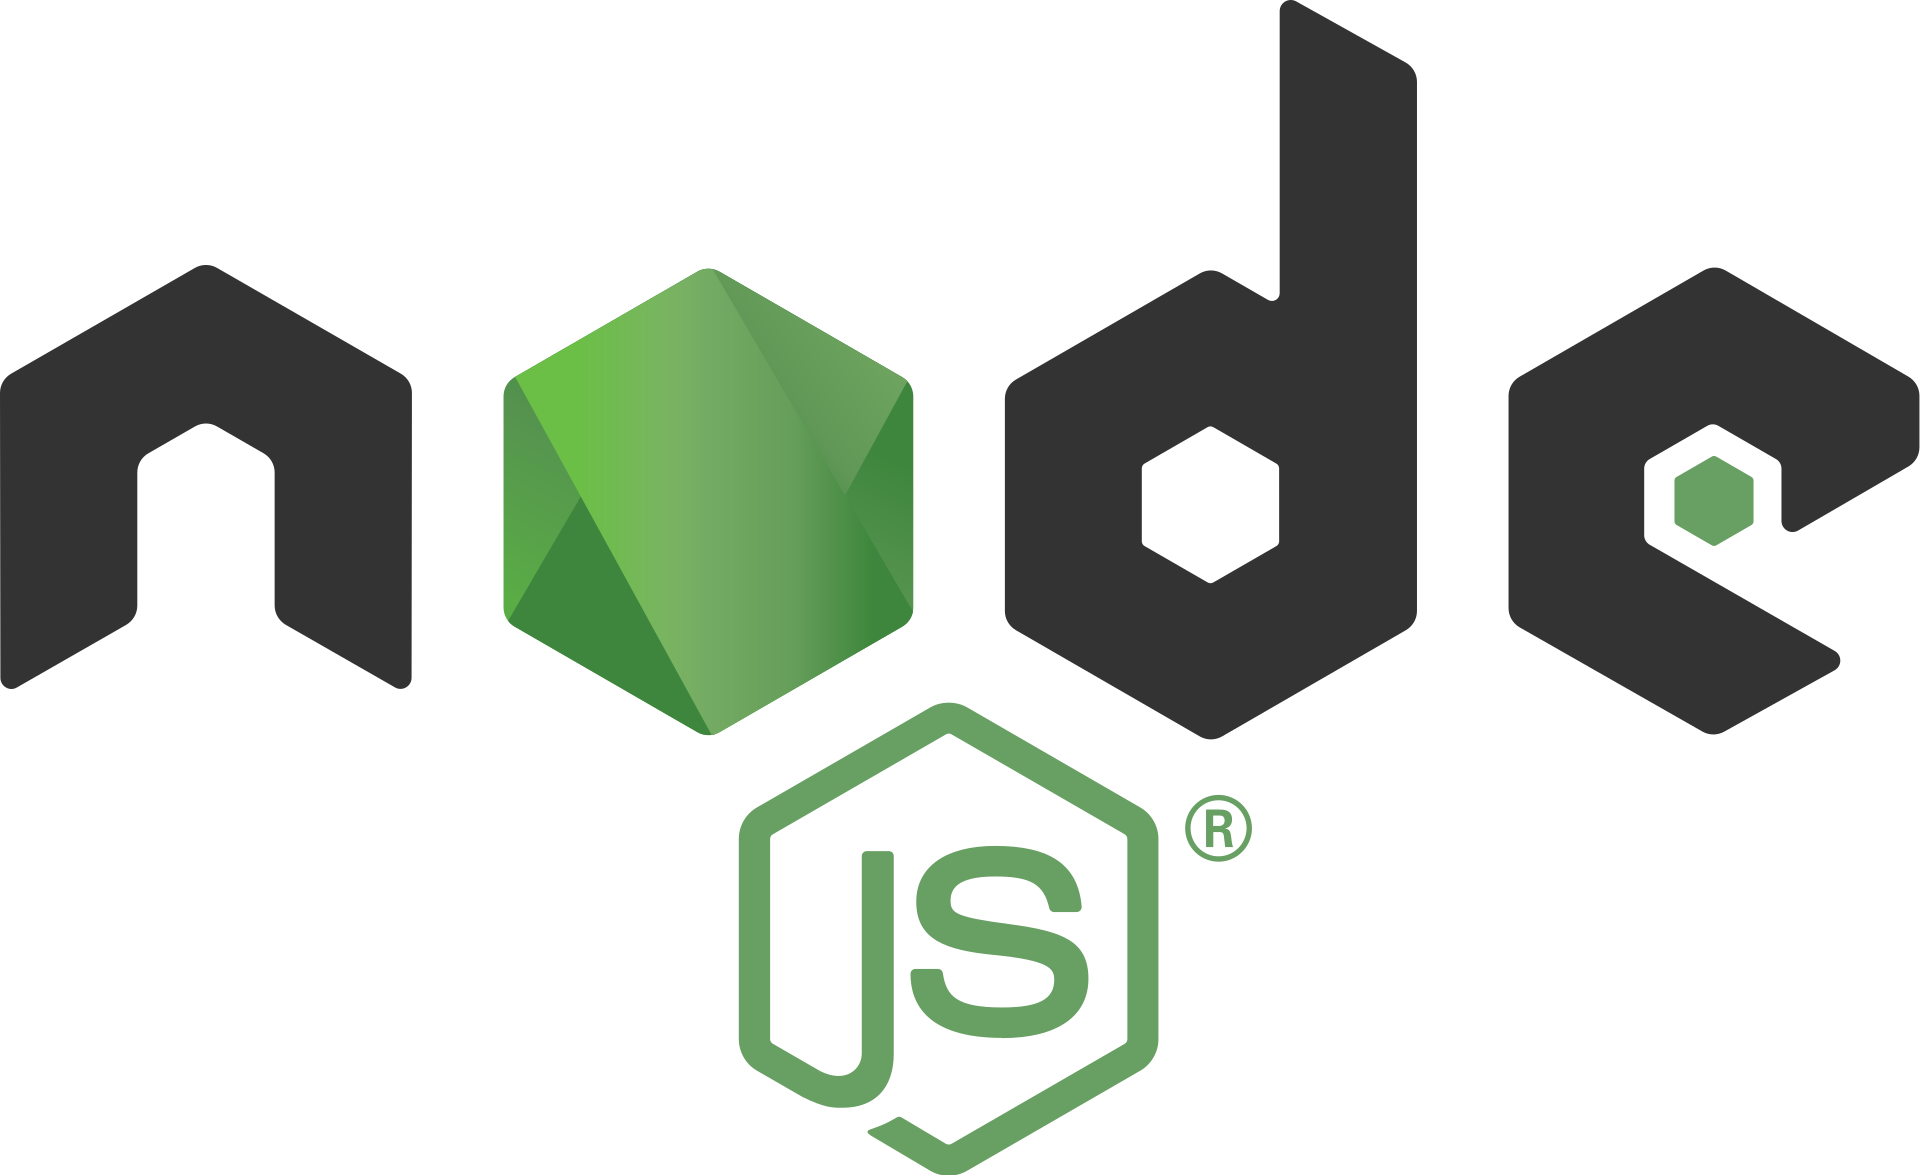 Node.js: designed to build scalable network applications